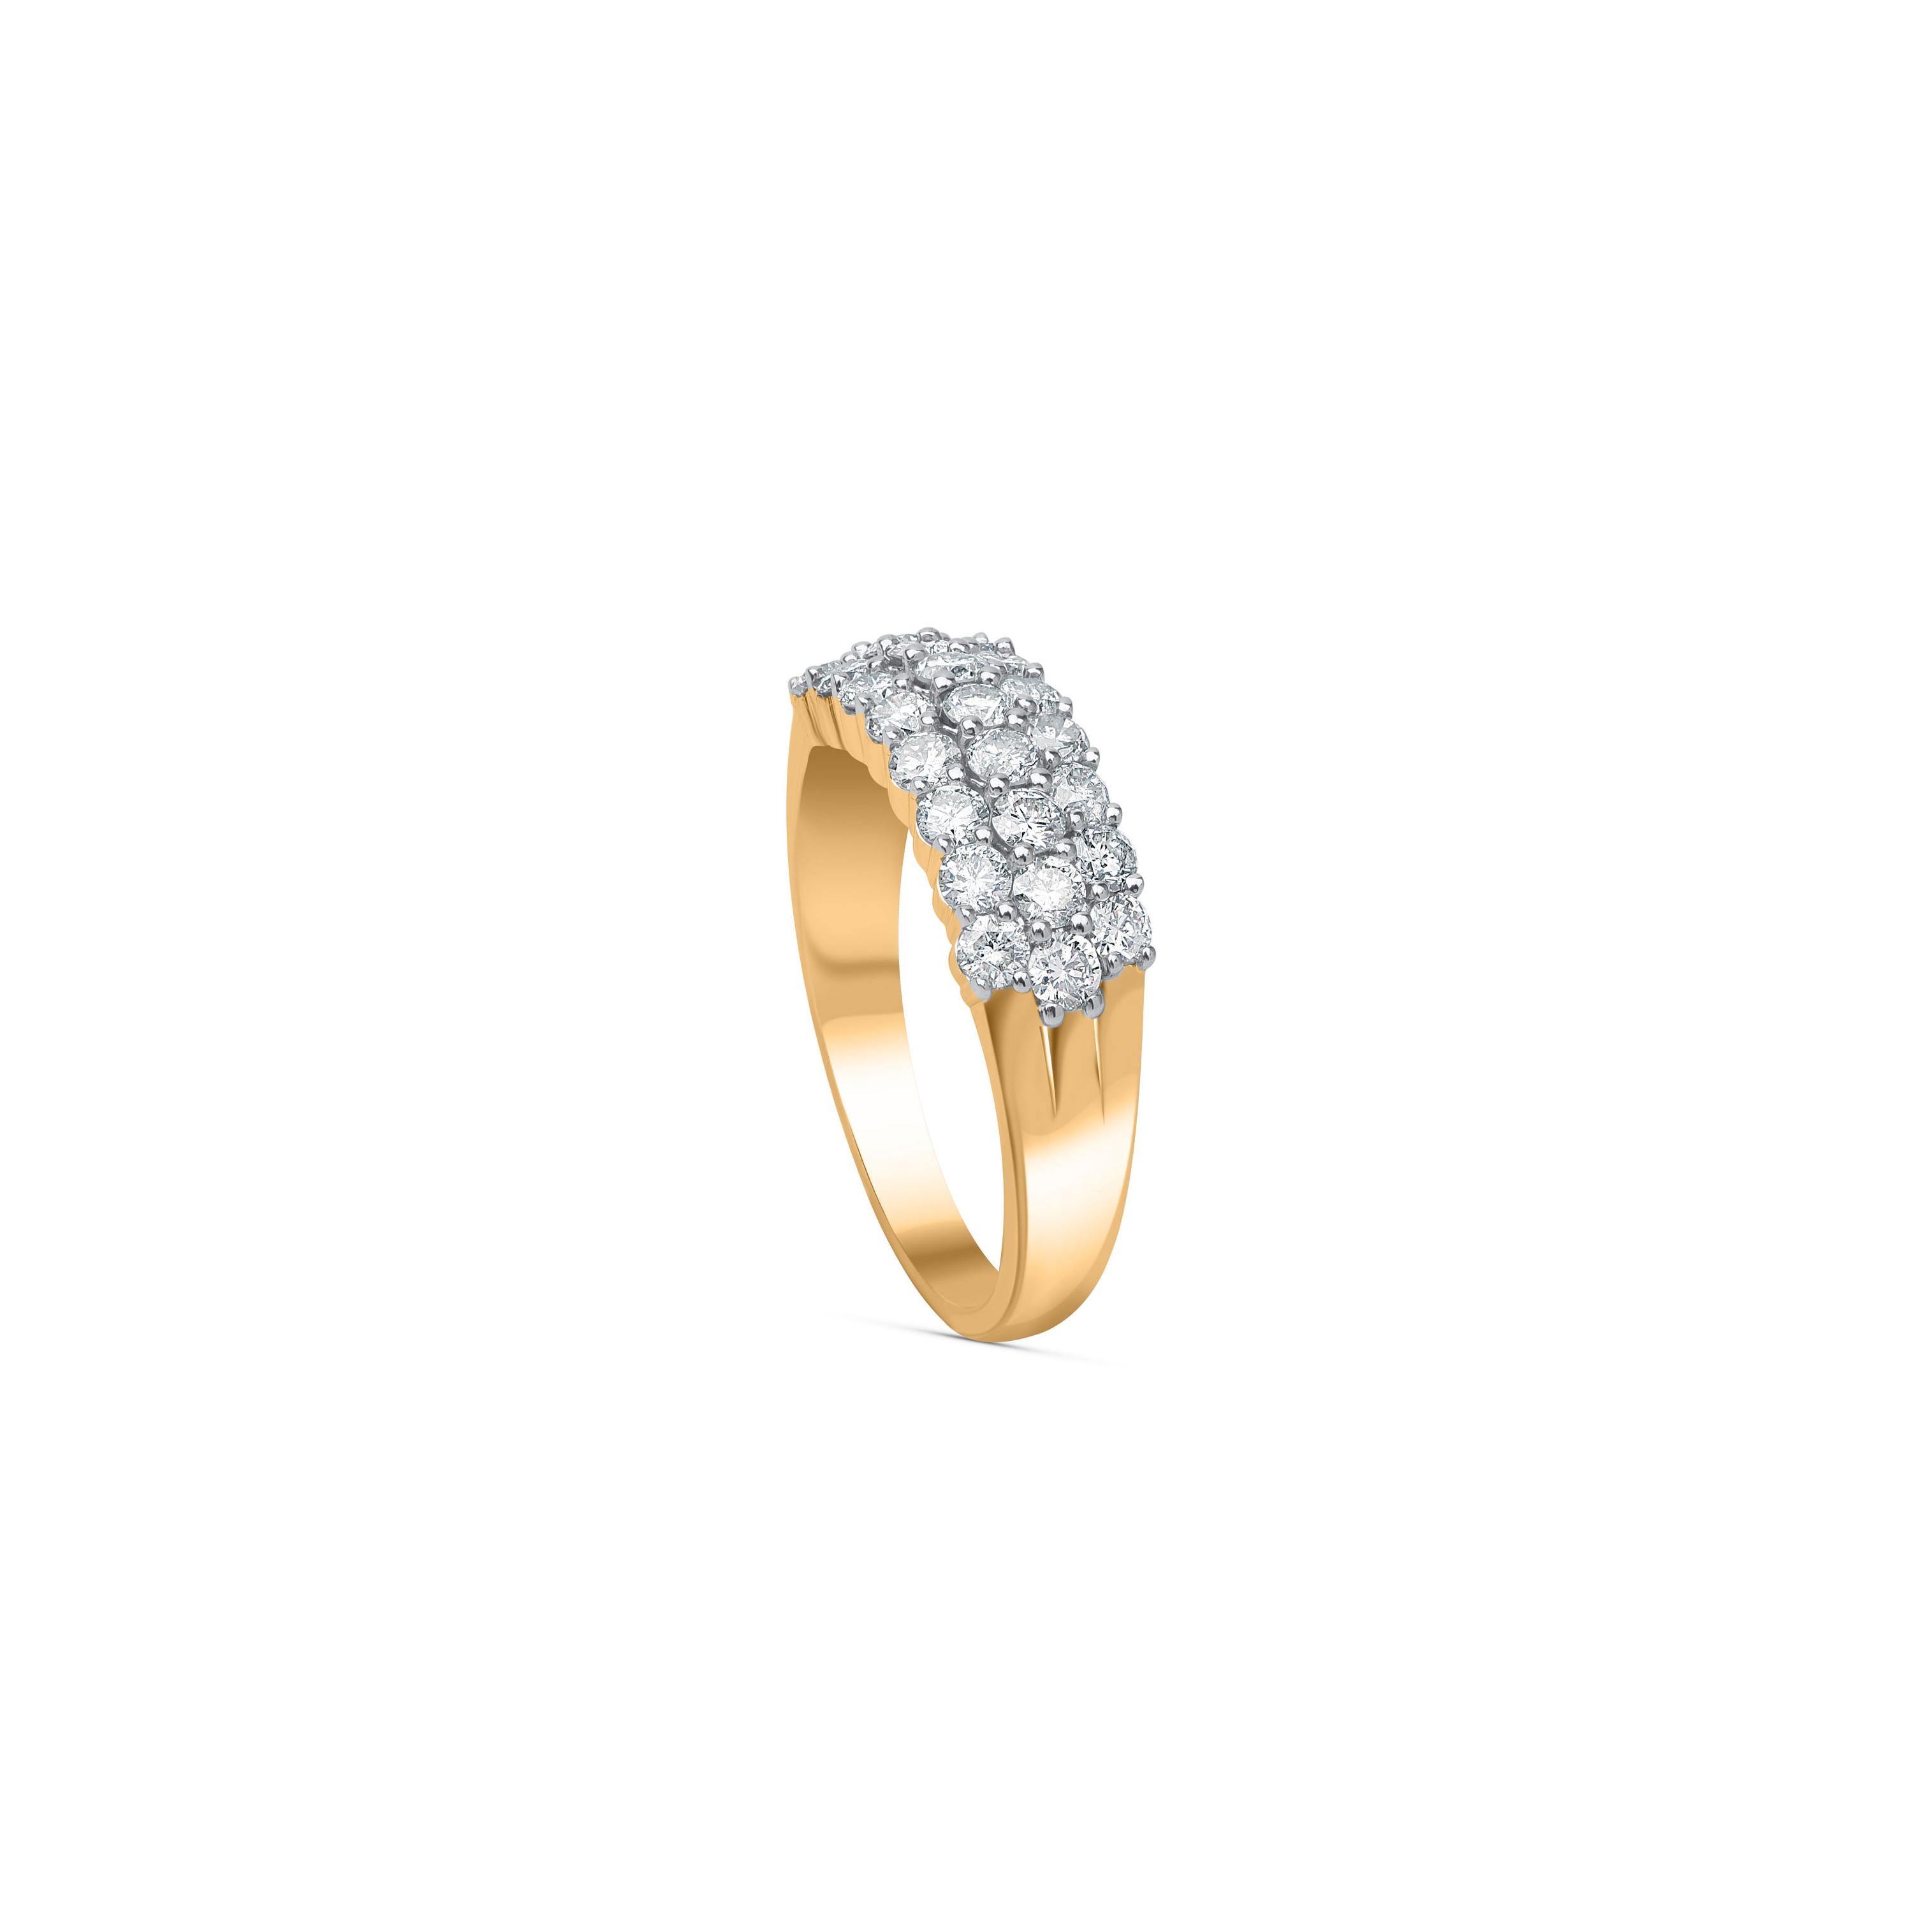 This diamond anniversary band is embellished with 25 brilliant diamonds set in prong setting and made by our in-house experts in 10 kt yellow gold. Will add a beautiful sparkle to your look. The diamonds are graded H-I color, I2 clarity. 

Metal